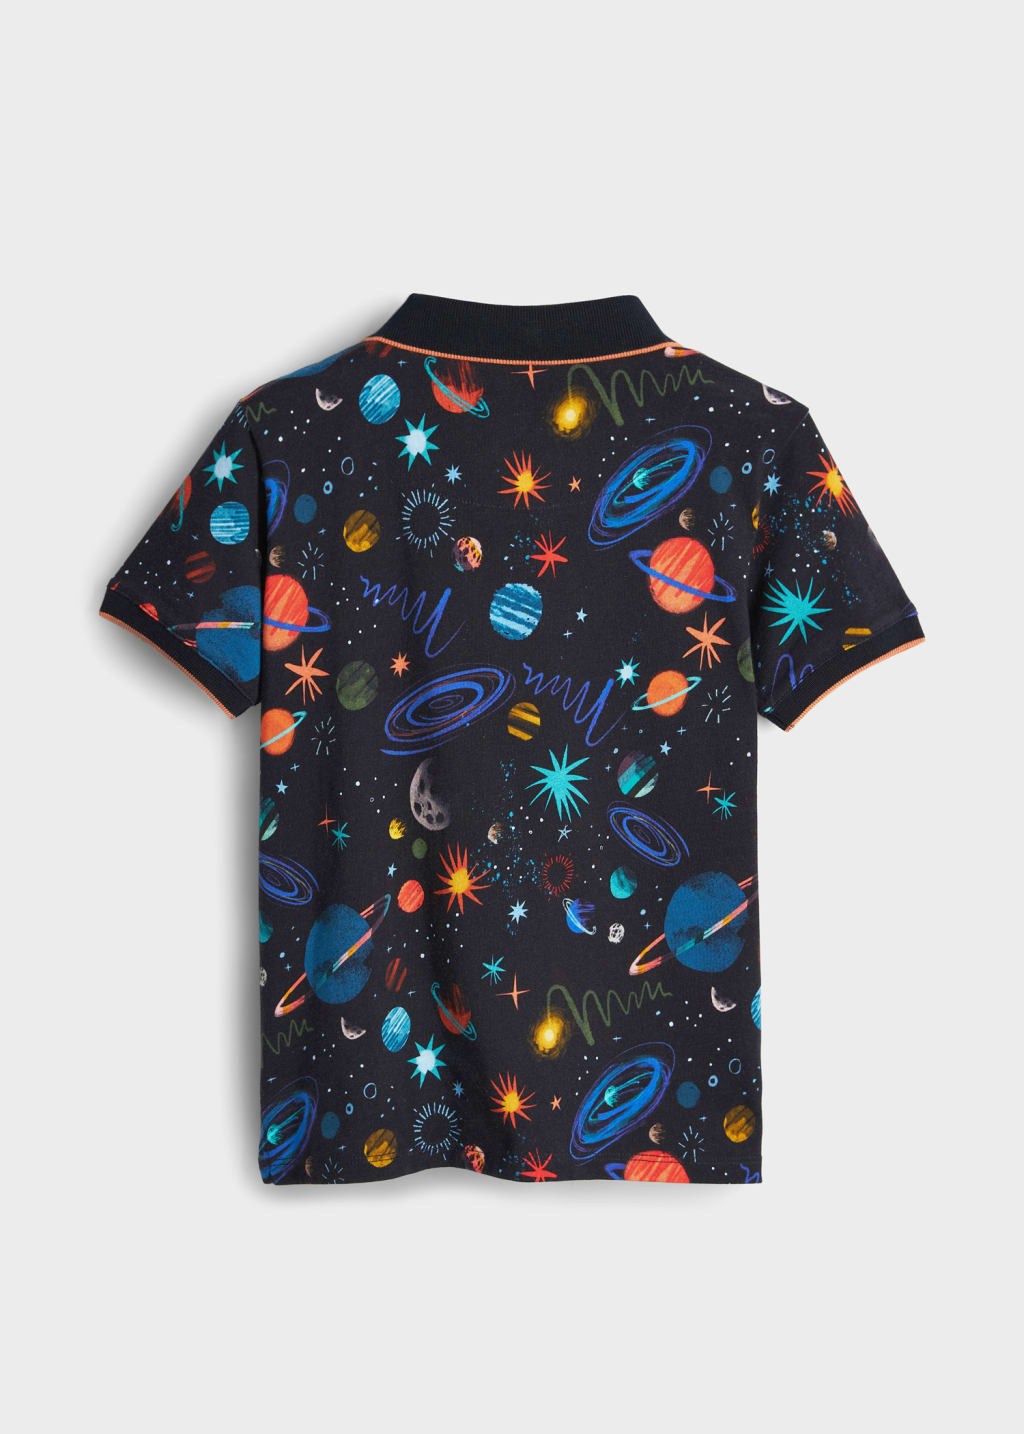 Back View - 2-13 Years Navy Planet Print Short-Sleeve Polo Shirt Paul Smith